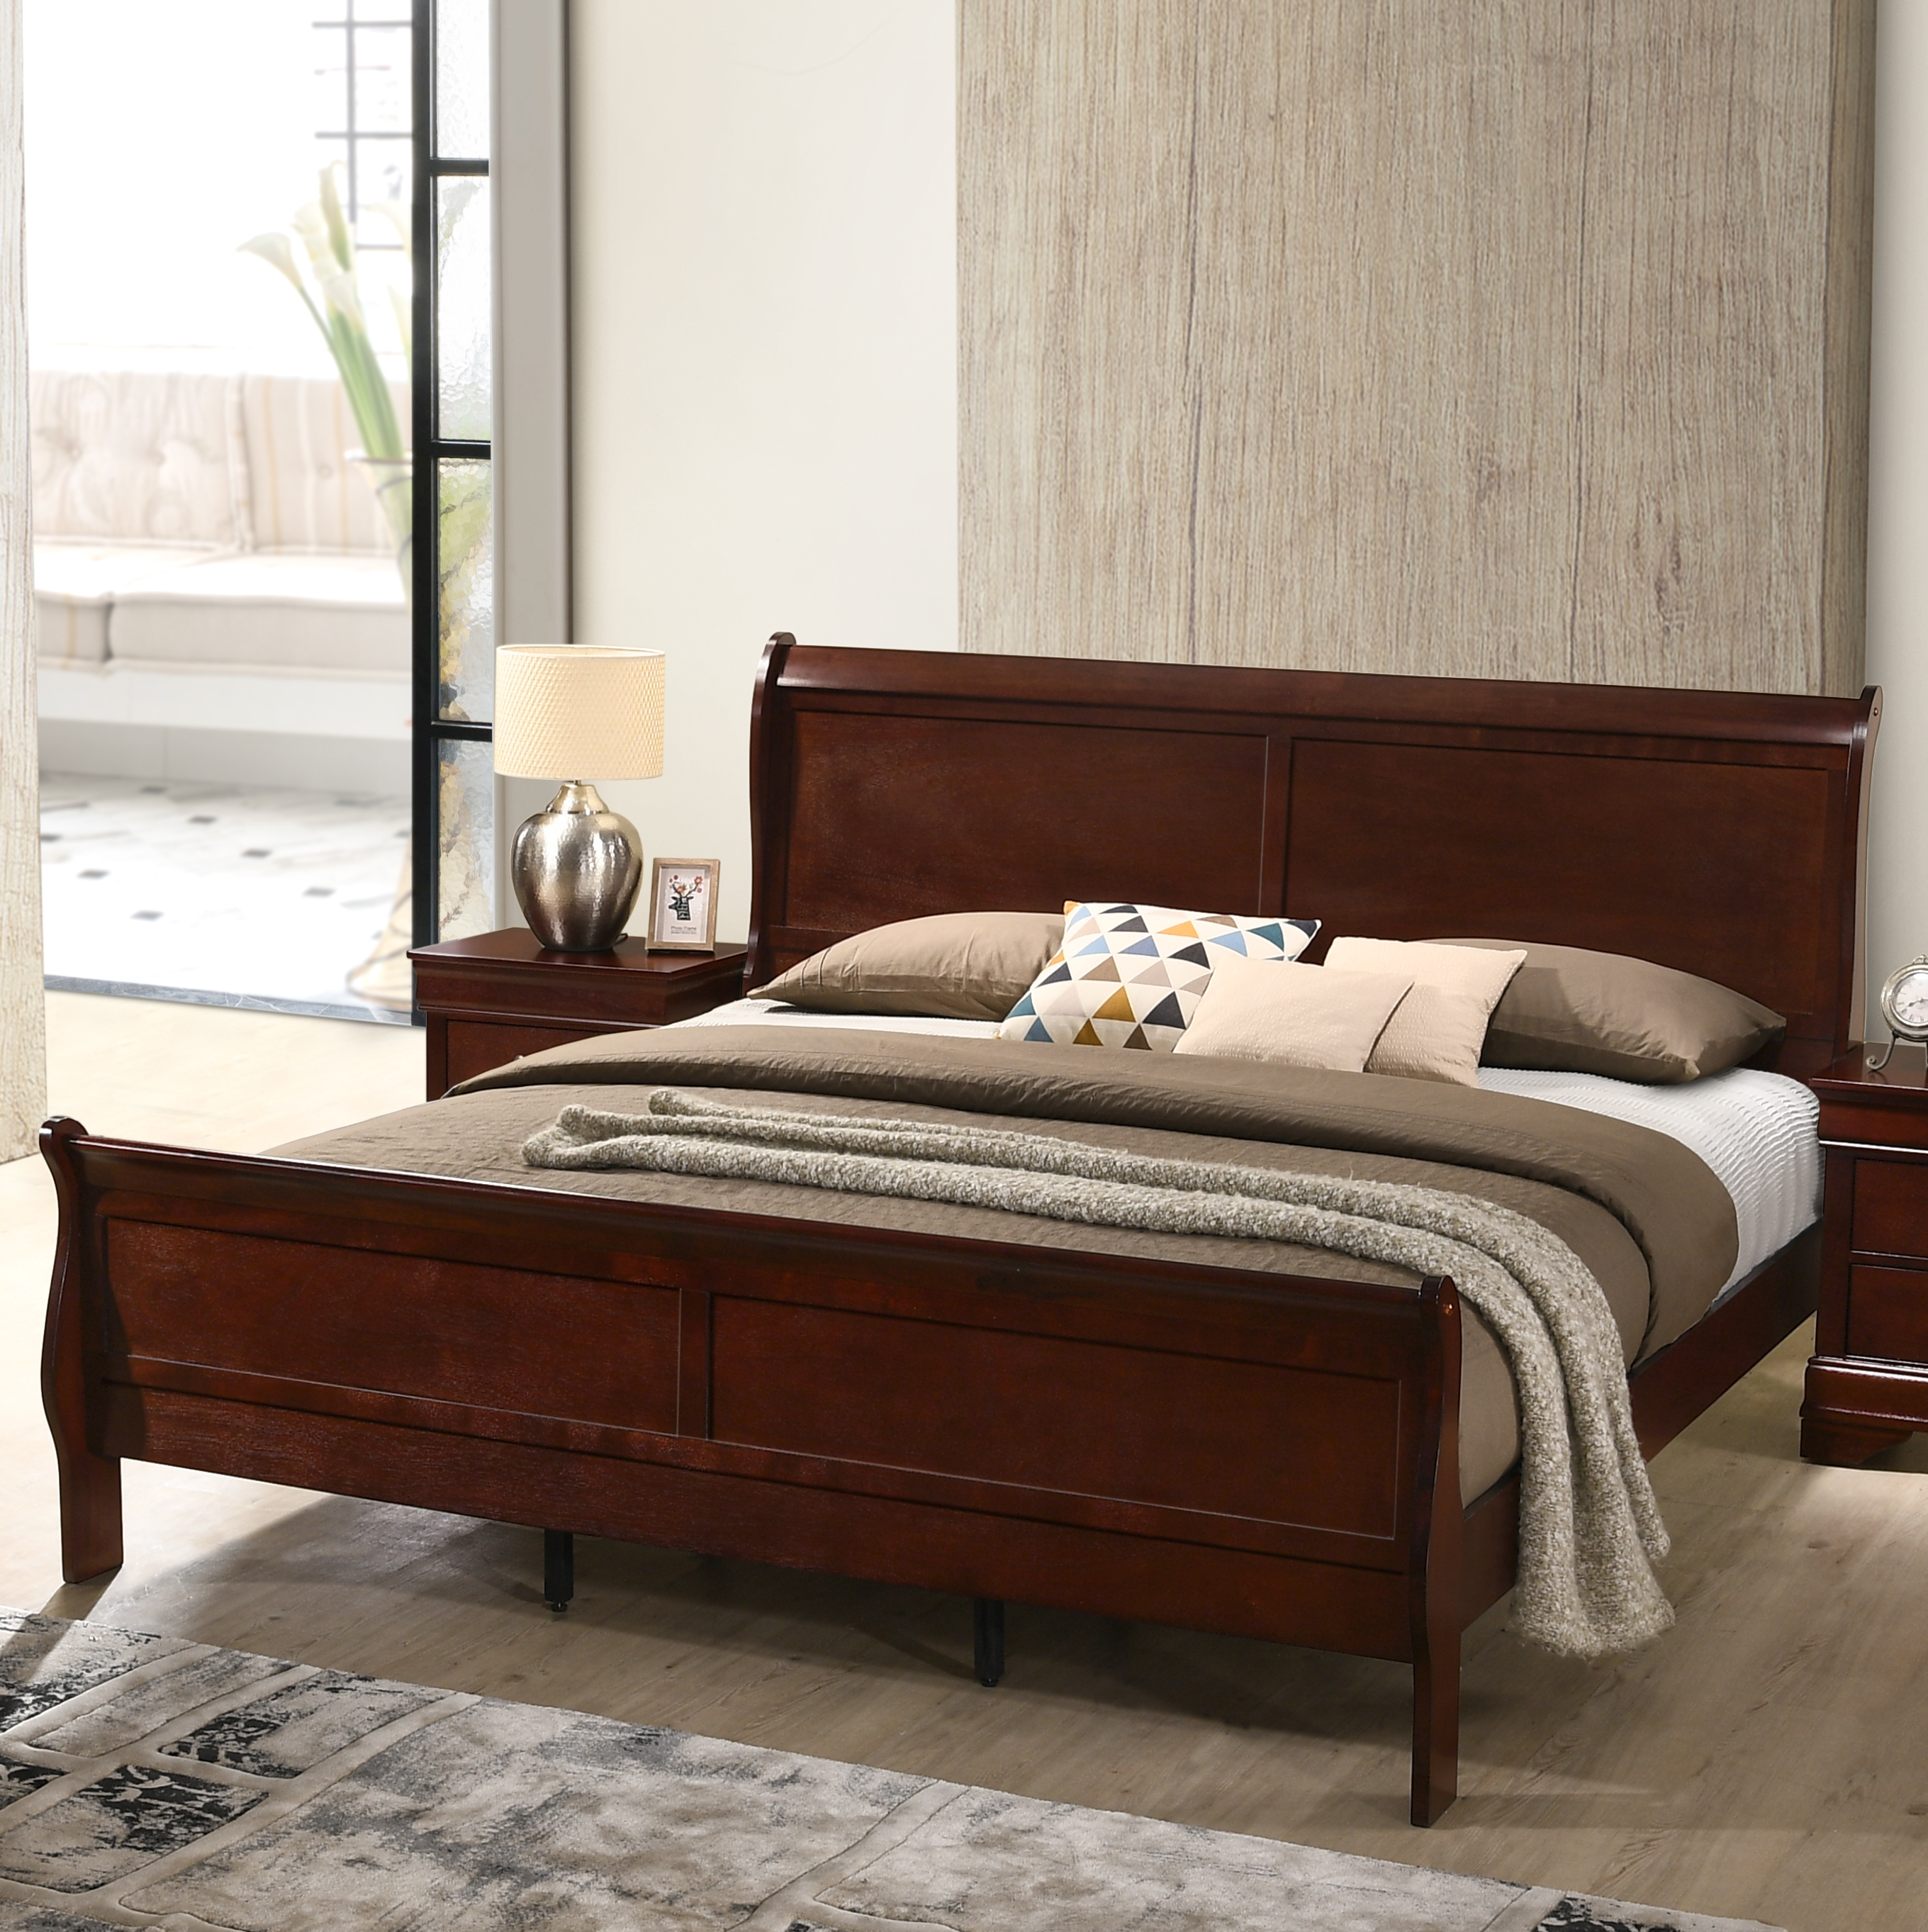 Furnituremaxx Isola Louis Philippe Style Sleigh Bedroom Set, King Bed, Dresser, Mirror and Night Stand, Cherry Finish 